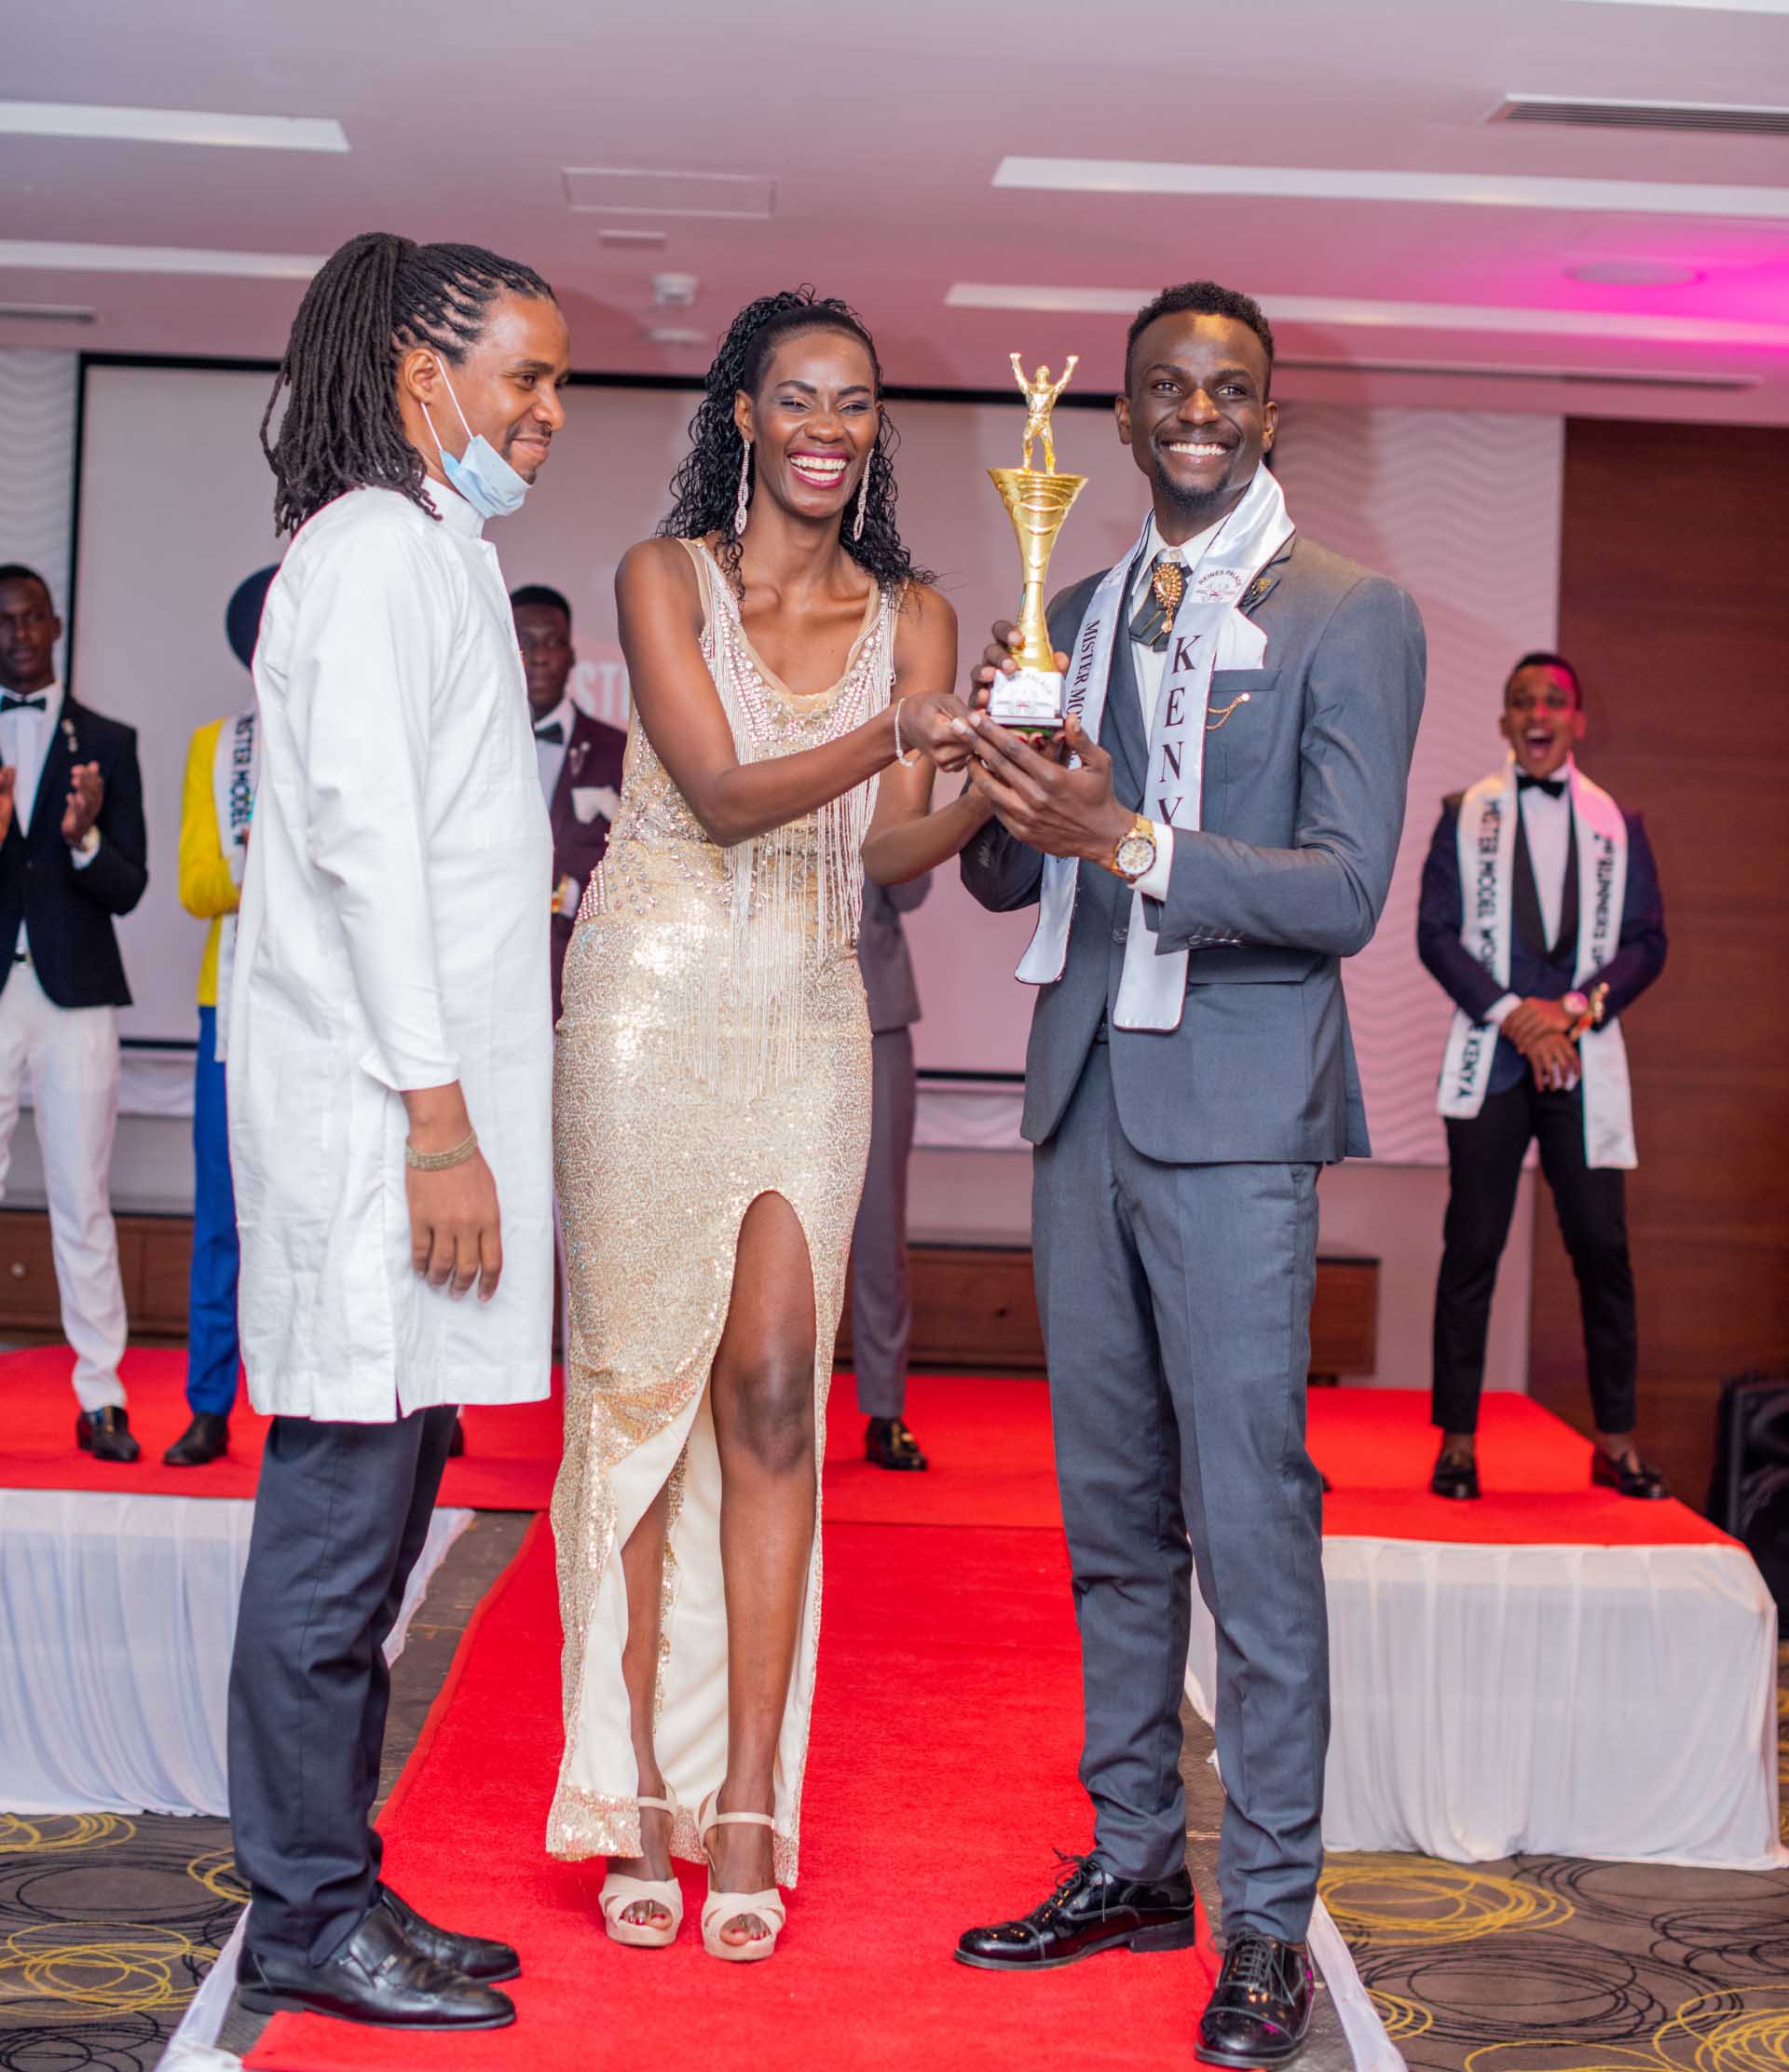 Mr. Wordwide Kenya winner Branham Otieno receiving the winner's trophy at the crowning event of the competition